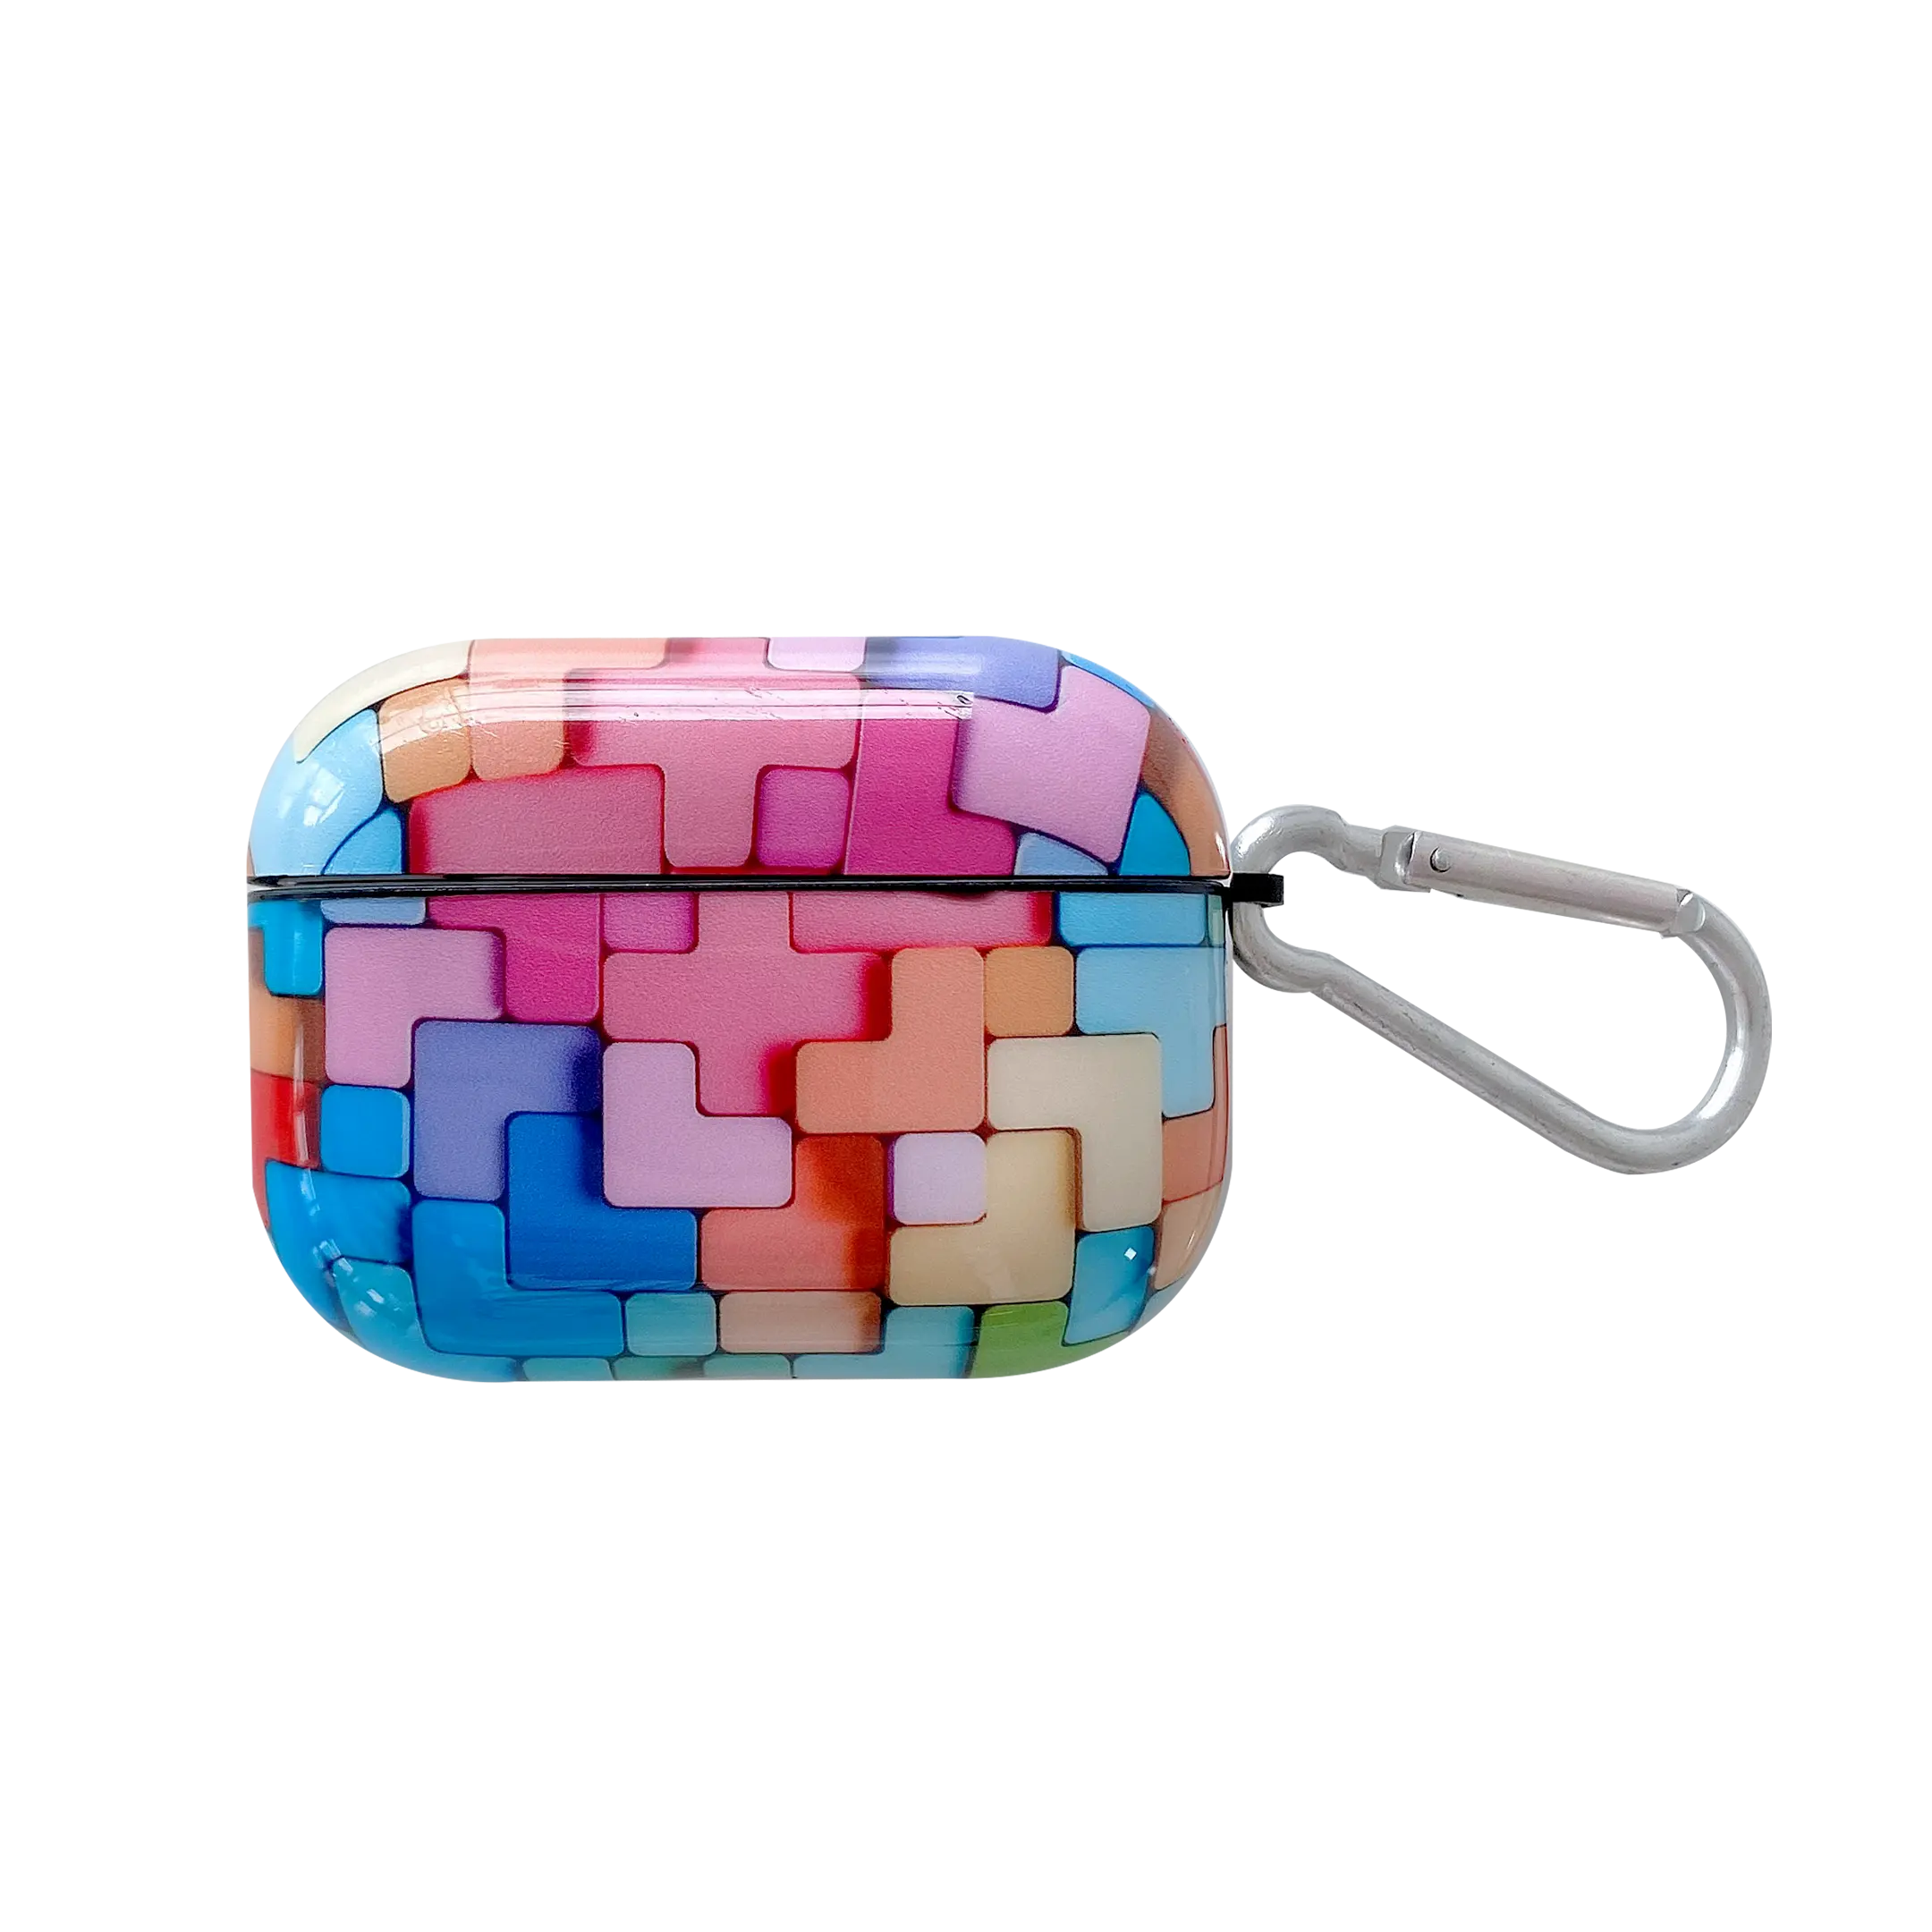 New Style Hot selling puzzle earphone case BQC headphone case rainbow headphone case FOR Airpad 1/2/3/4